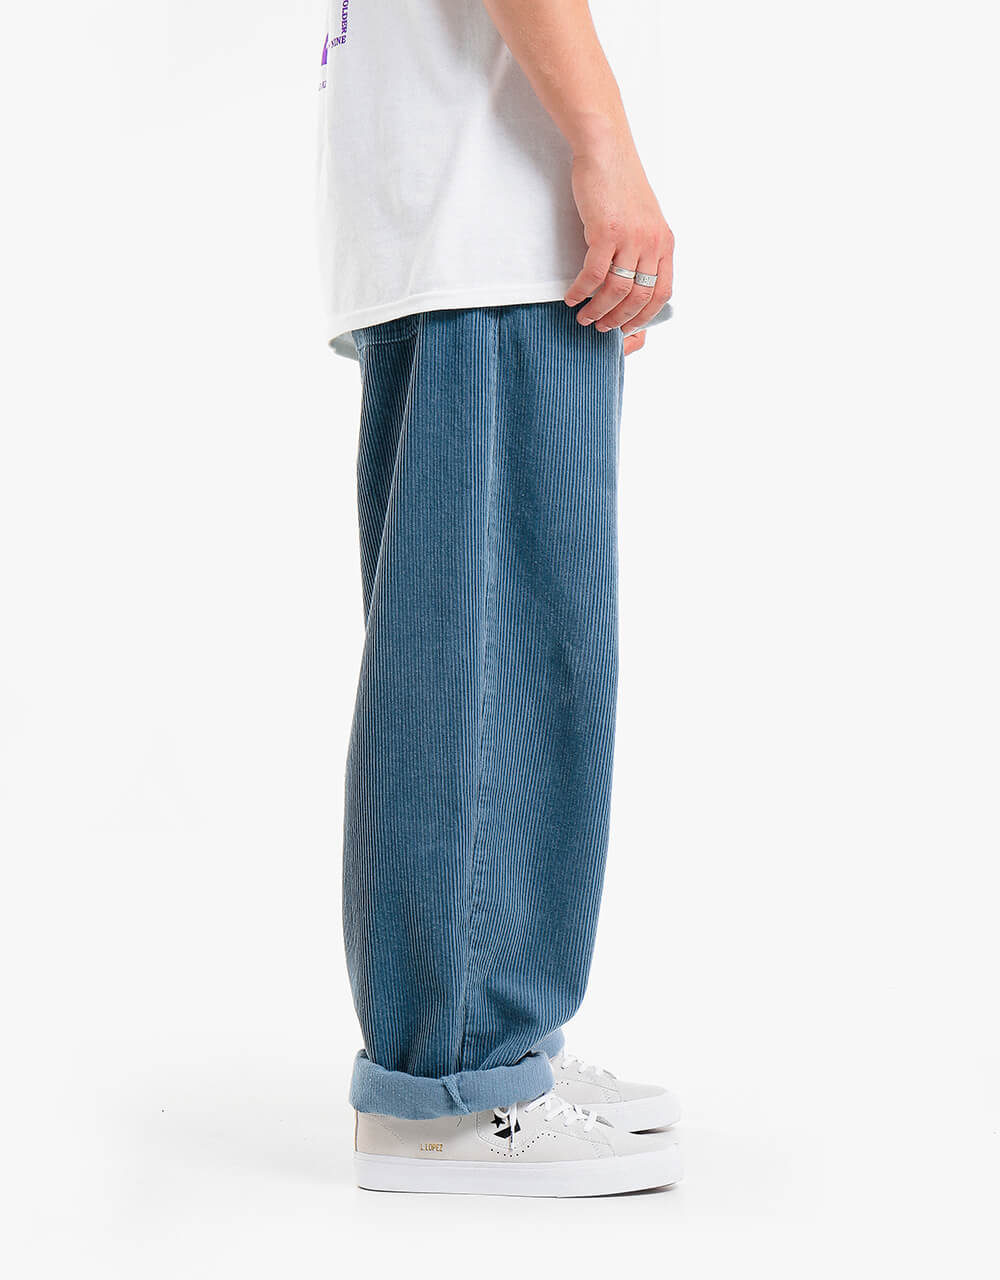 Route One Super Baggy Big Wale Cords - Air Force Blue